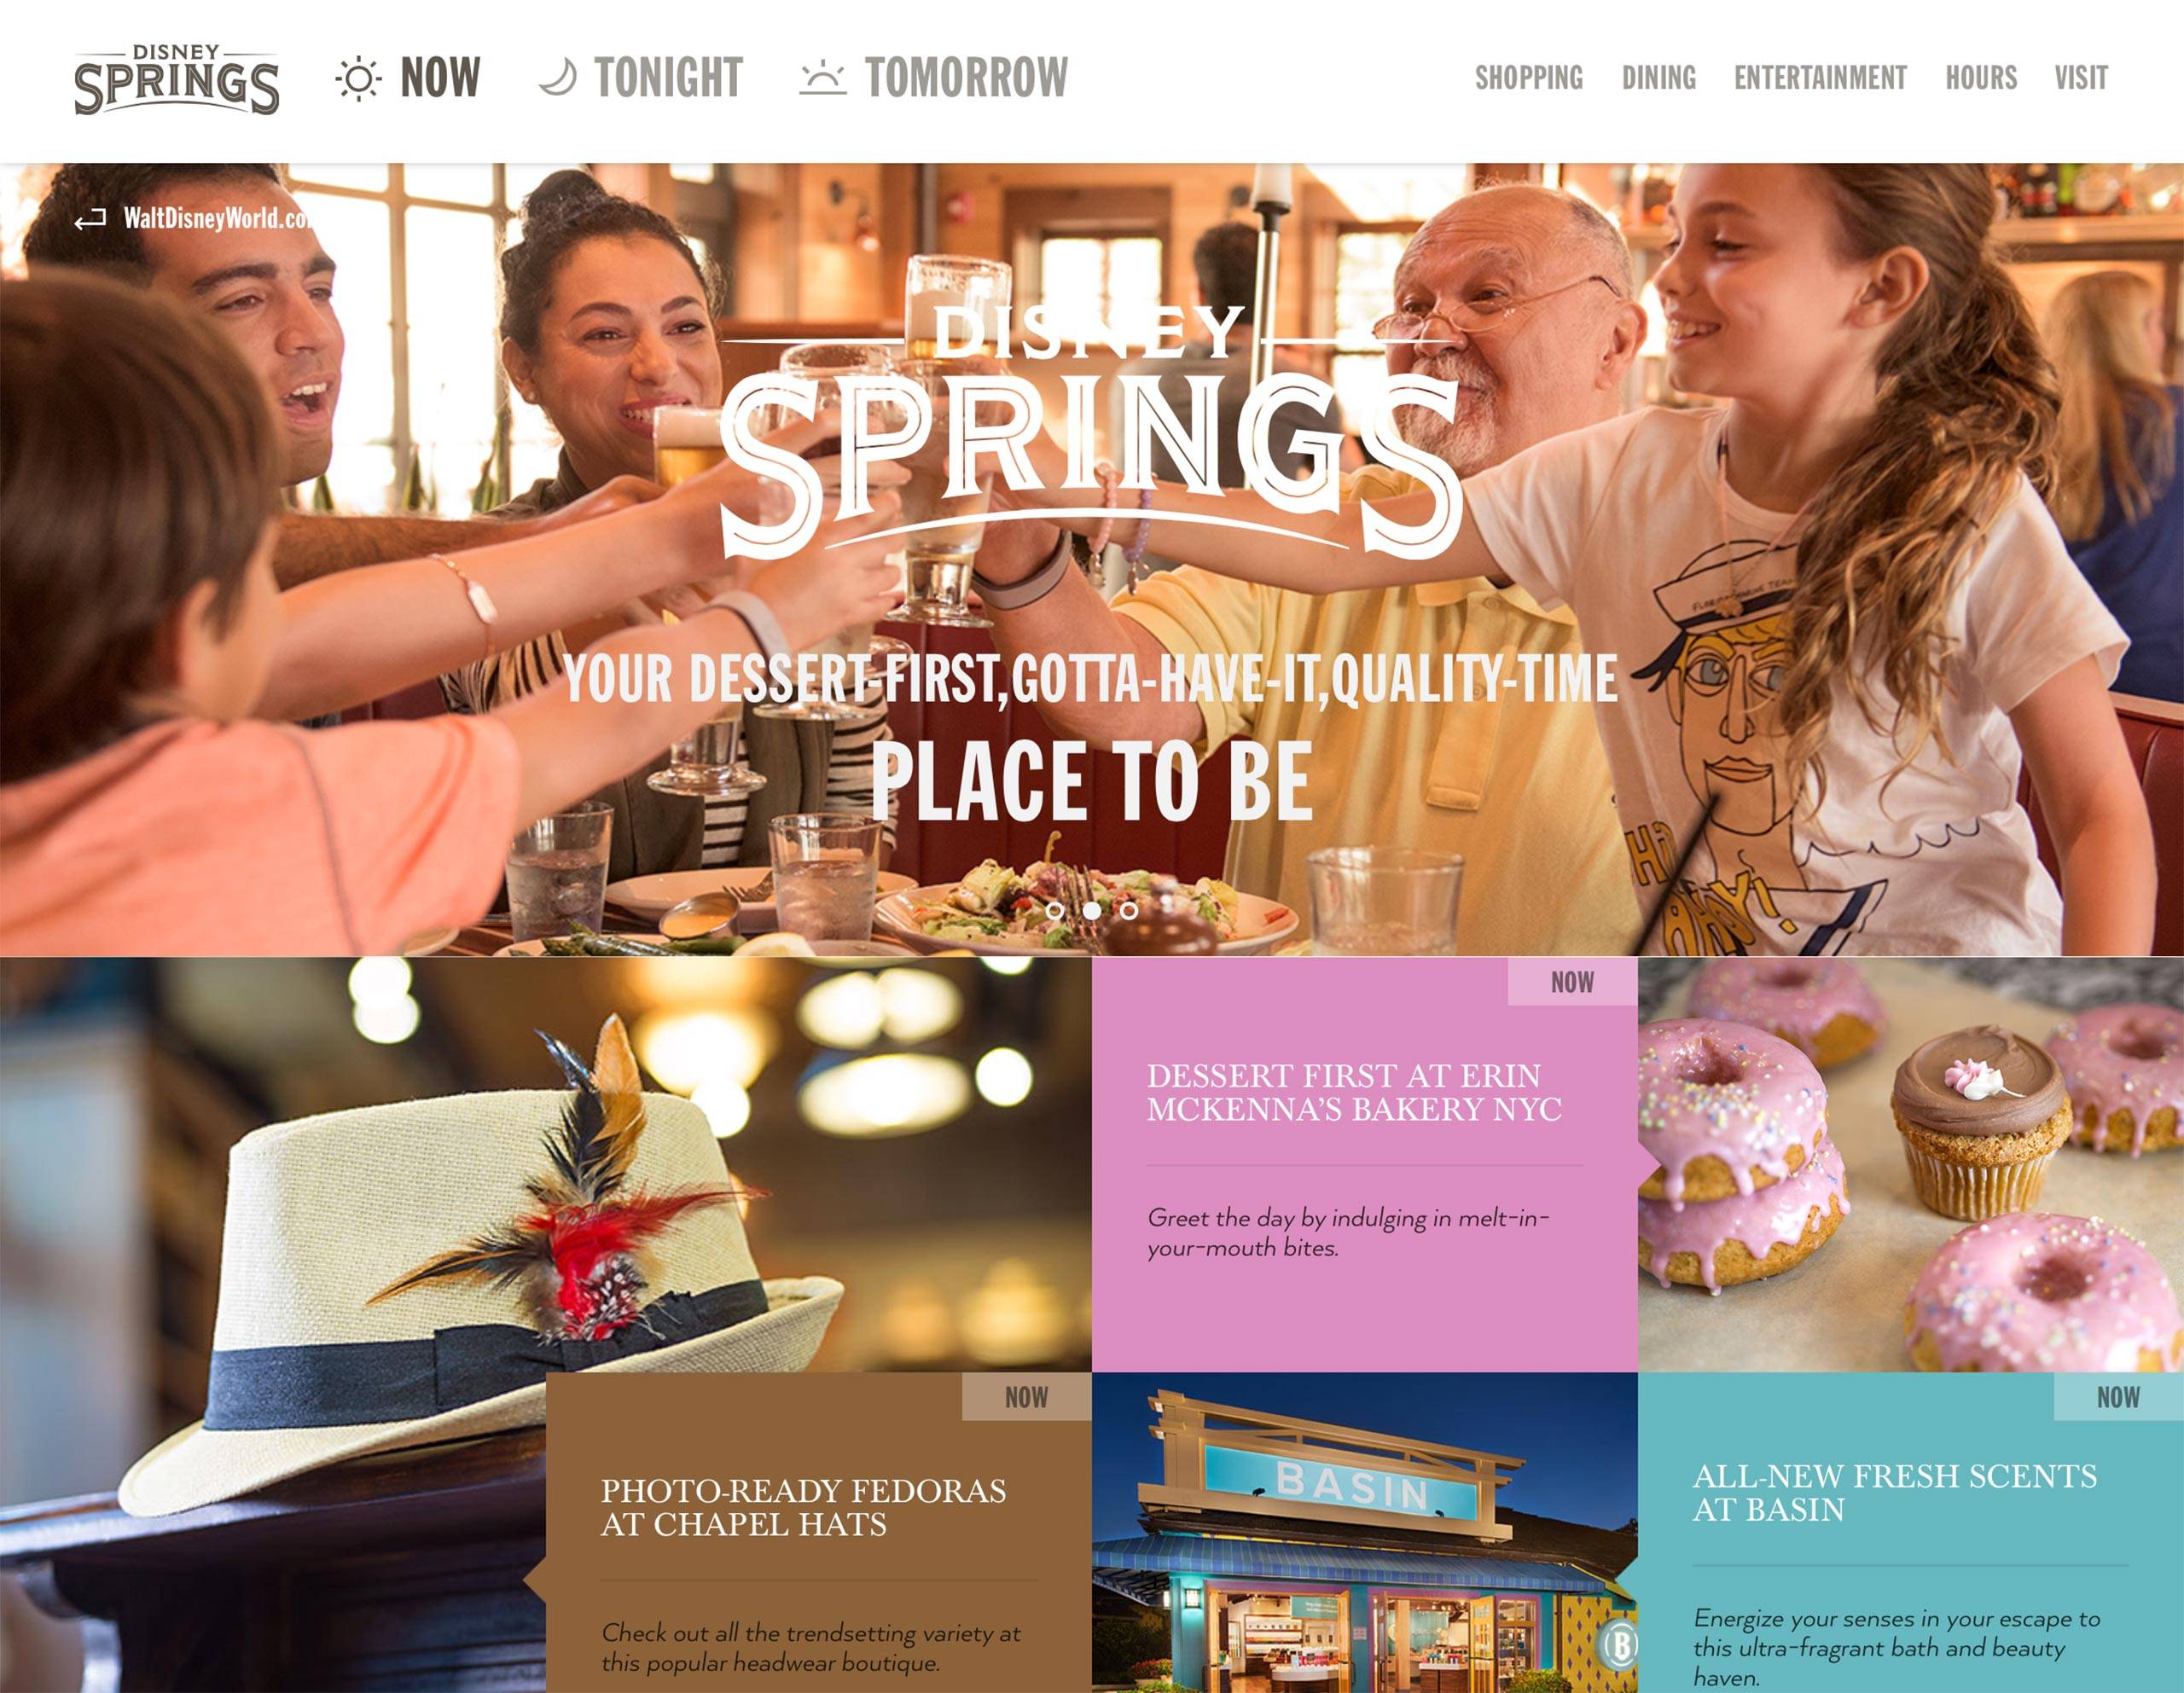 Disney launches a dedicated Disney Springs website to introduce its new identity